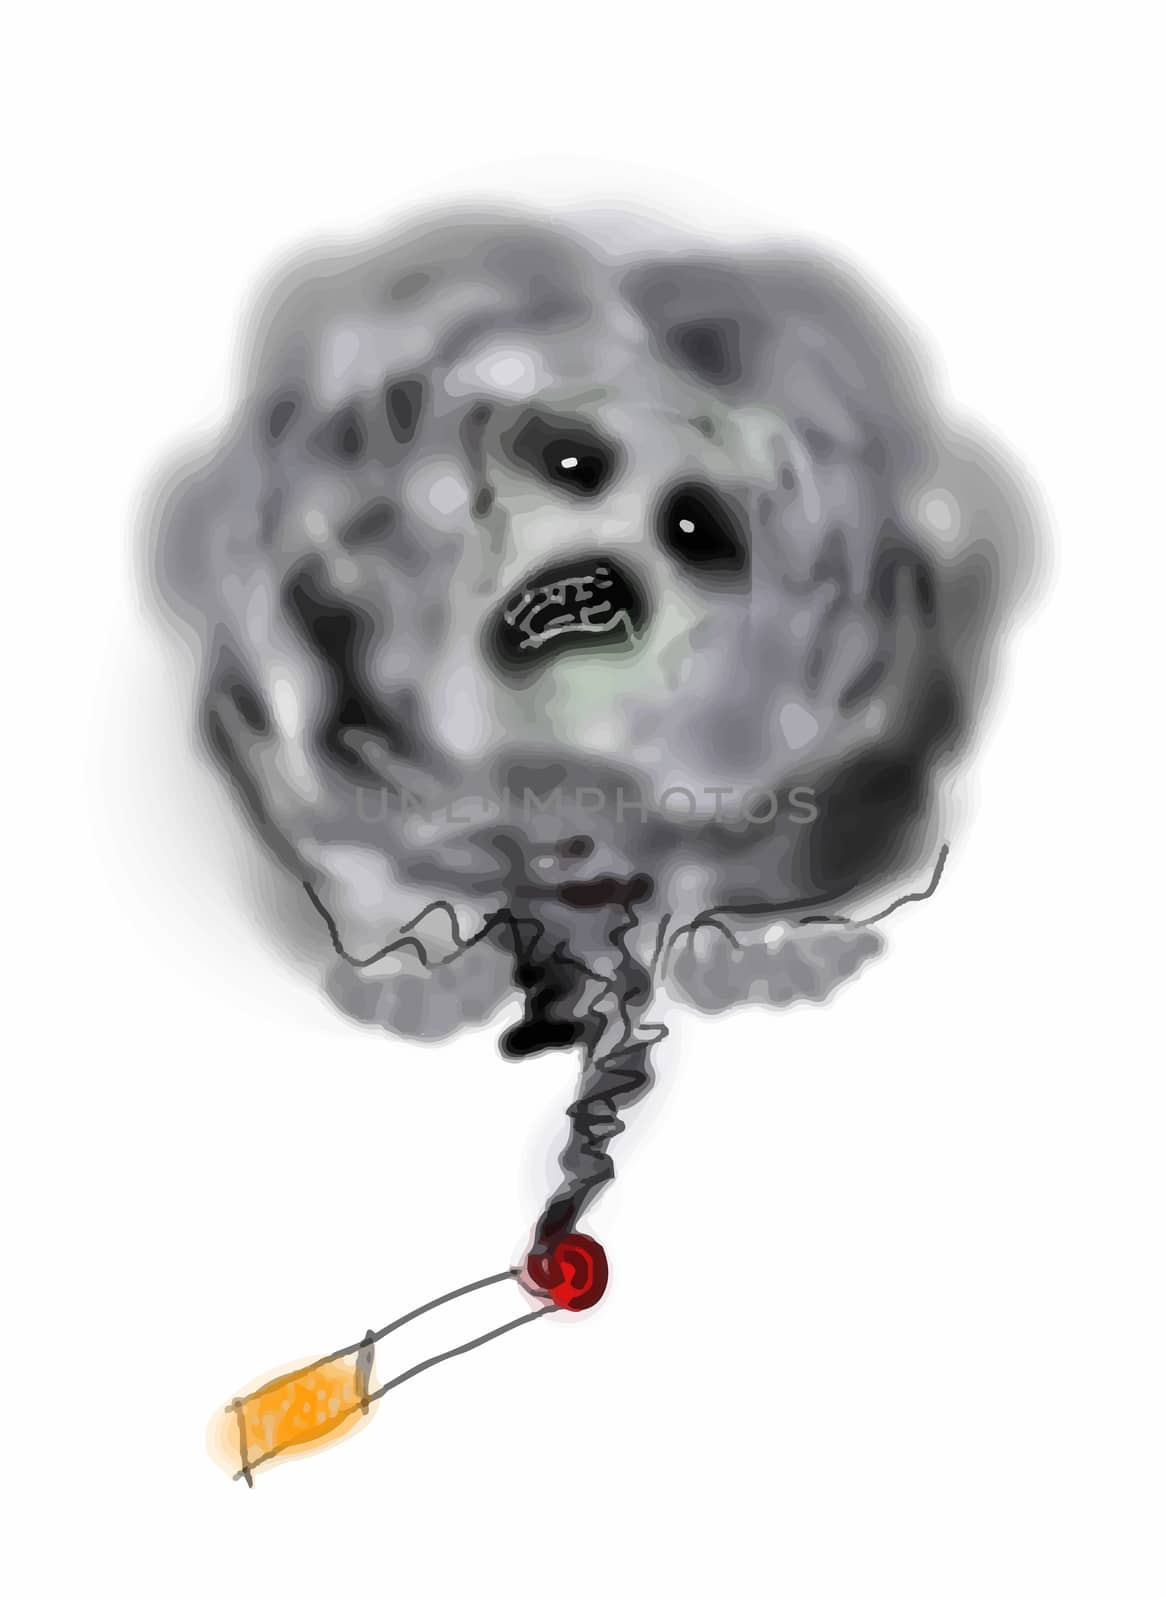 Smoking Kills  -  Ilustration of cigarette and smoke face by gstalker